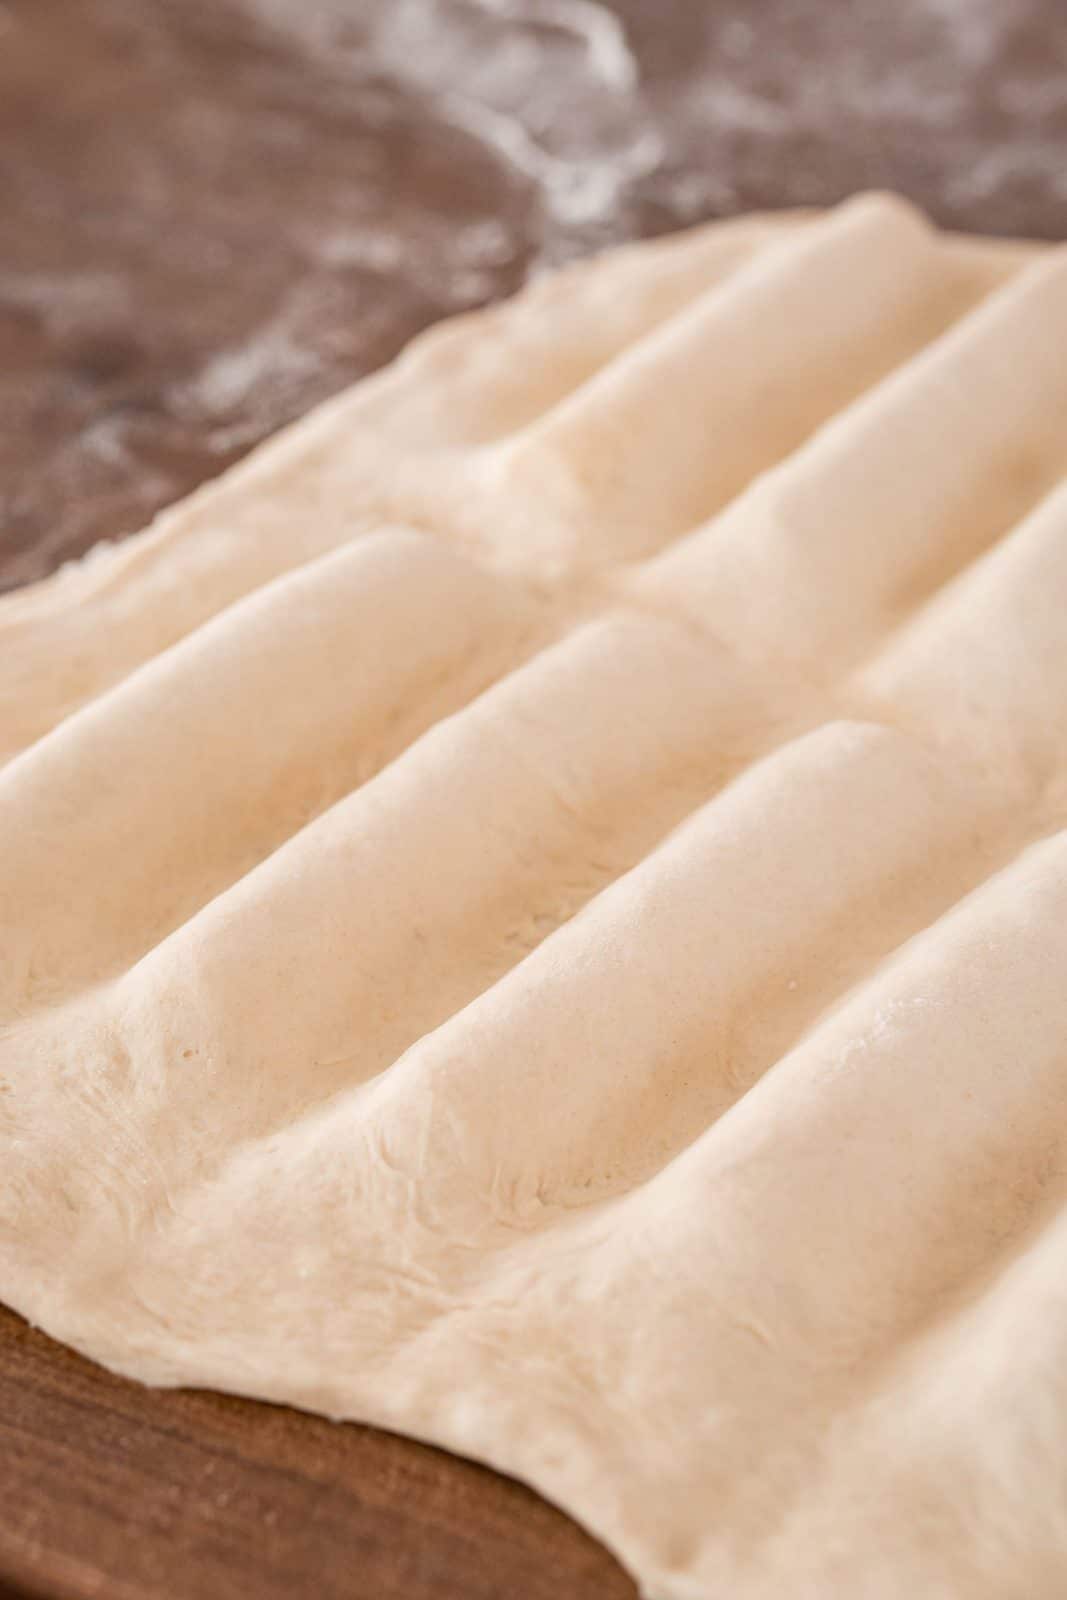 Pizza dough pressed around breadsticks and edges.